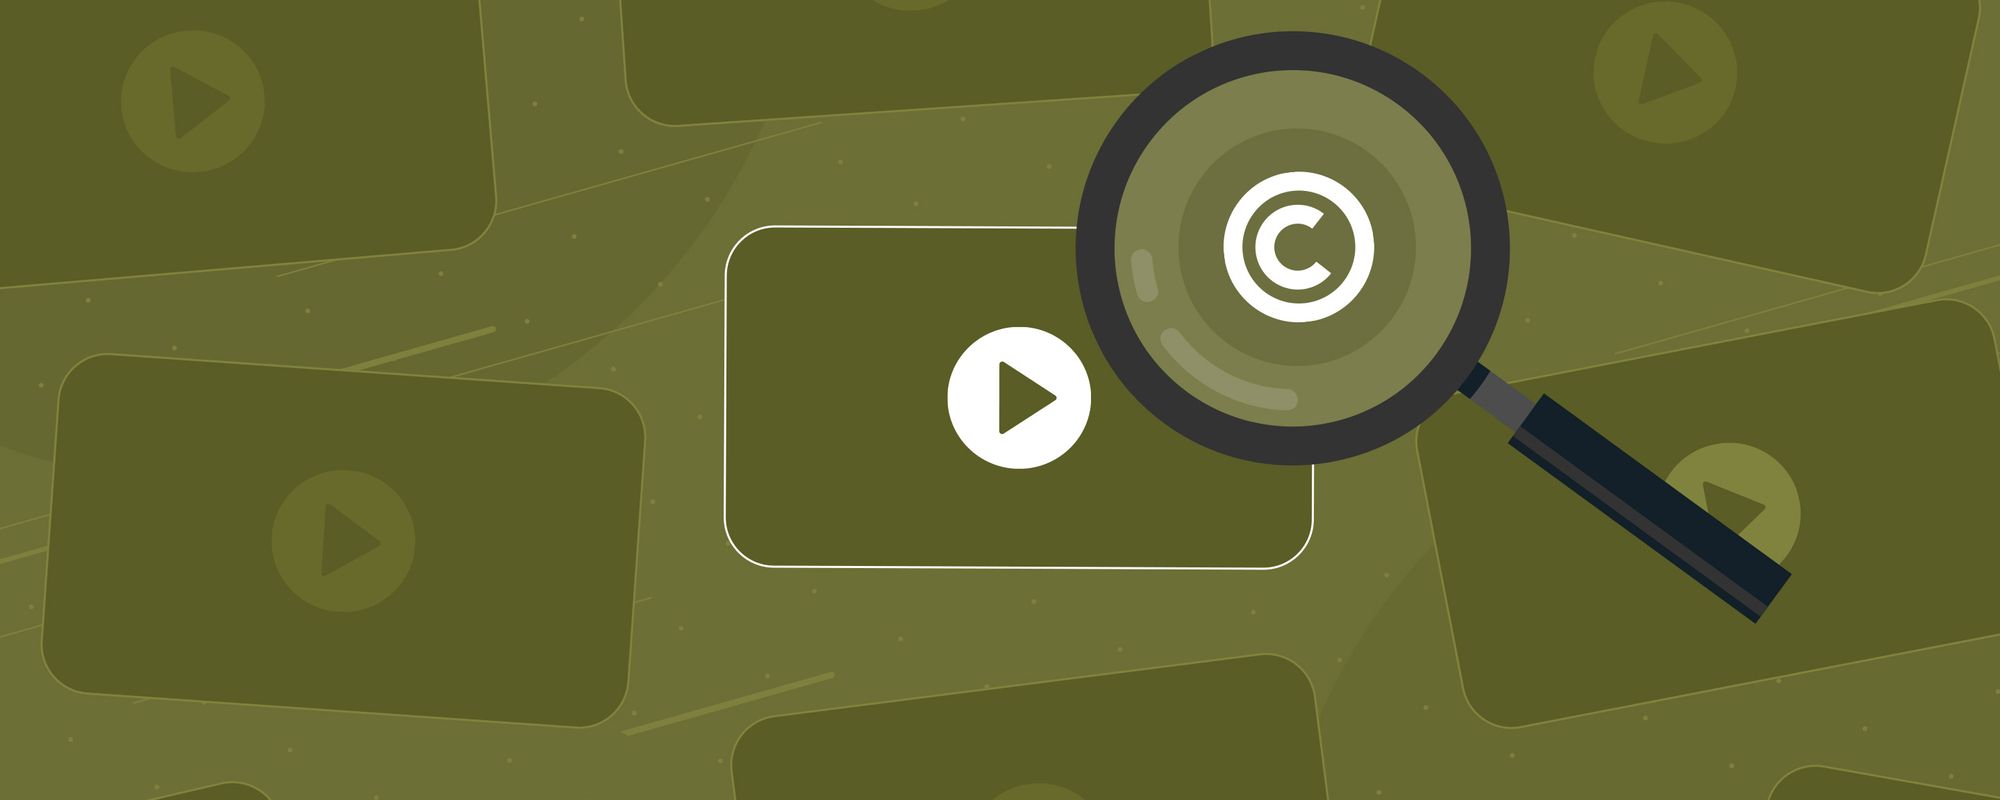 Images of YouTube and Twitch screens with a magnifying glass showing a copyright symbol to show the function of the DMCA.